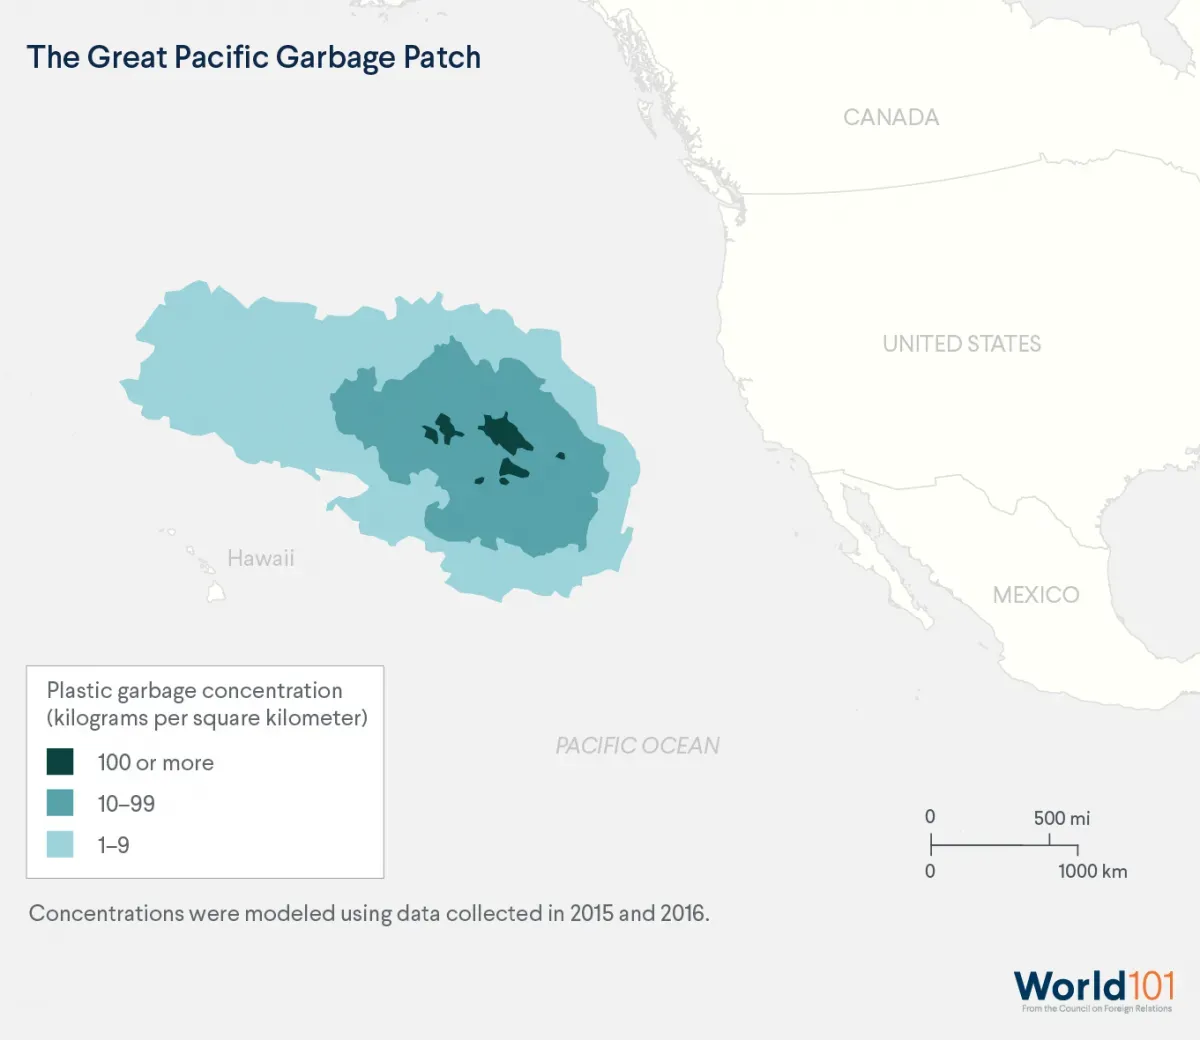 Map of the Great Pacific Garbage Patch, which covers a wide swatch of the Pacific Ocean near Hawaii (based on models using data collected in 2015 and 2016).